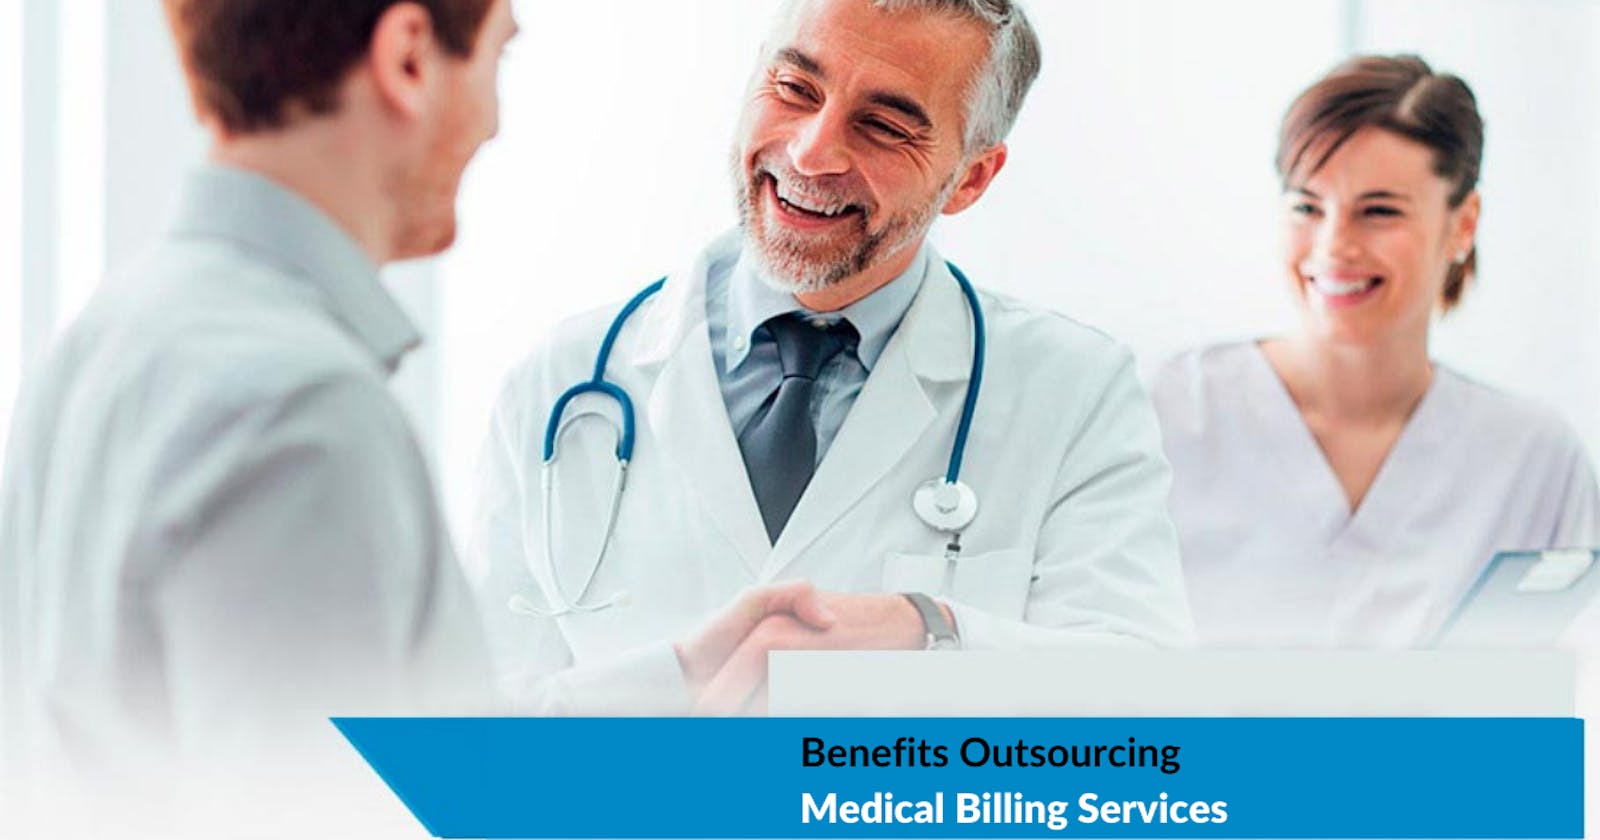 Benefits of Outsourcing Medical Billing in Healthcare